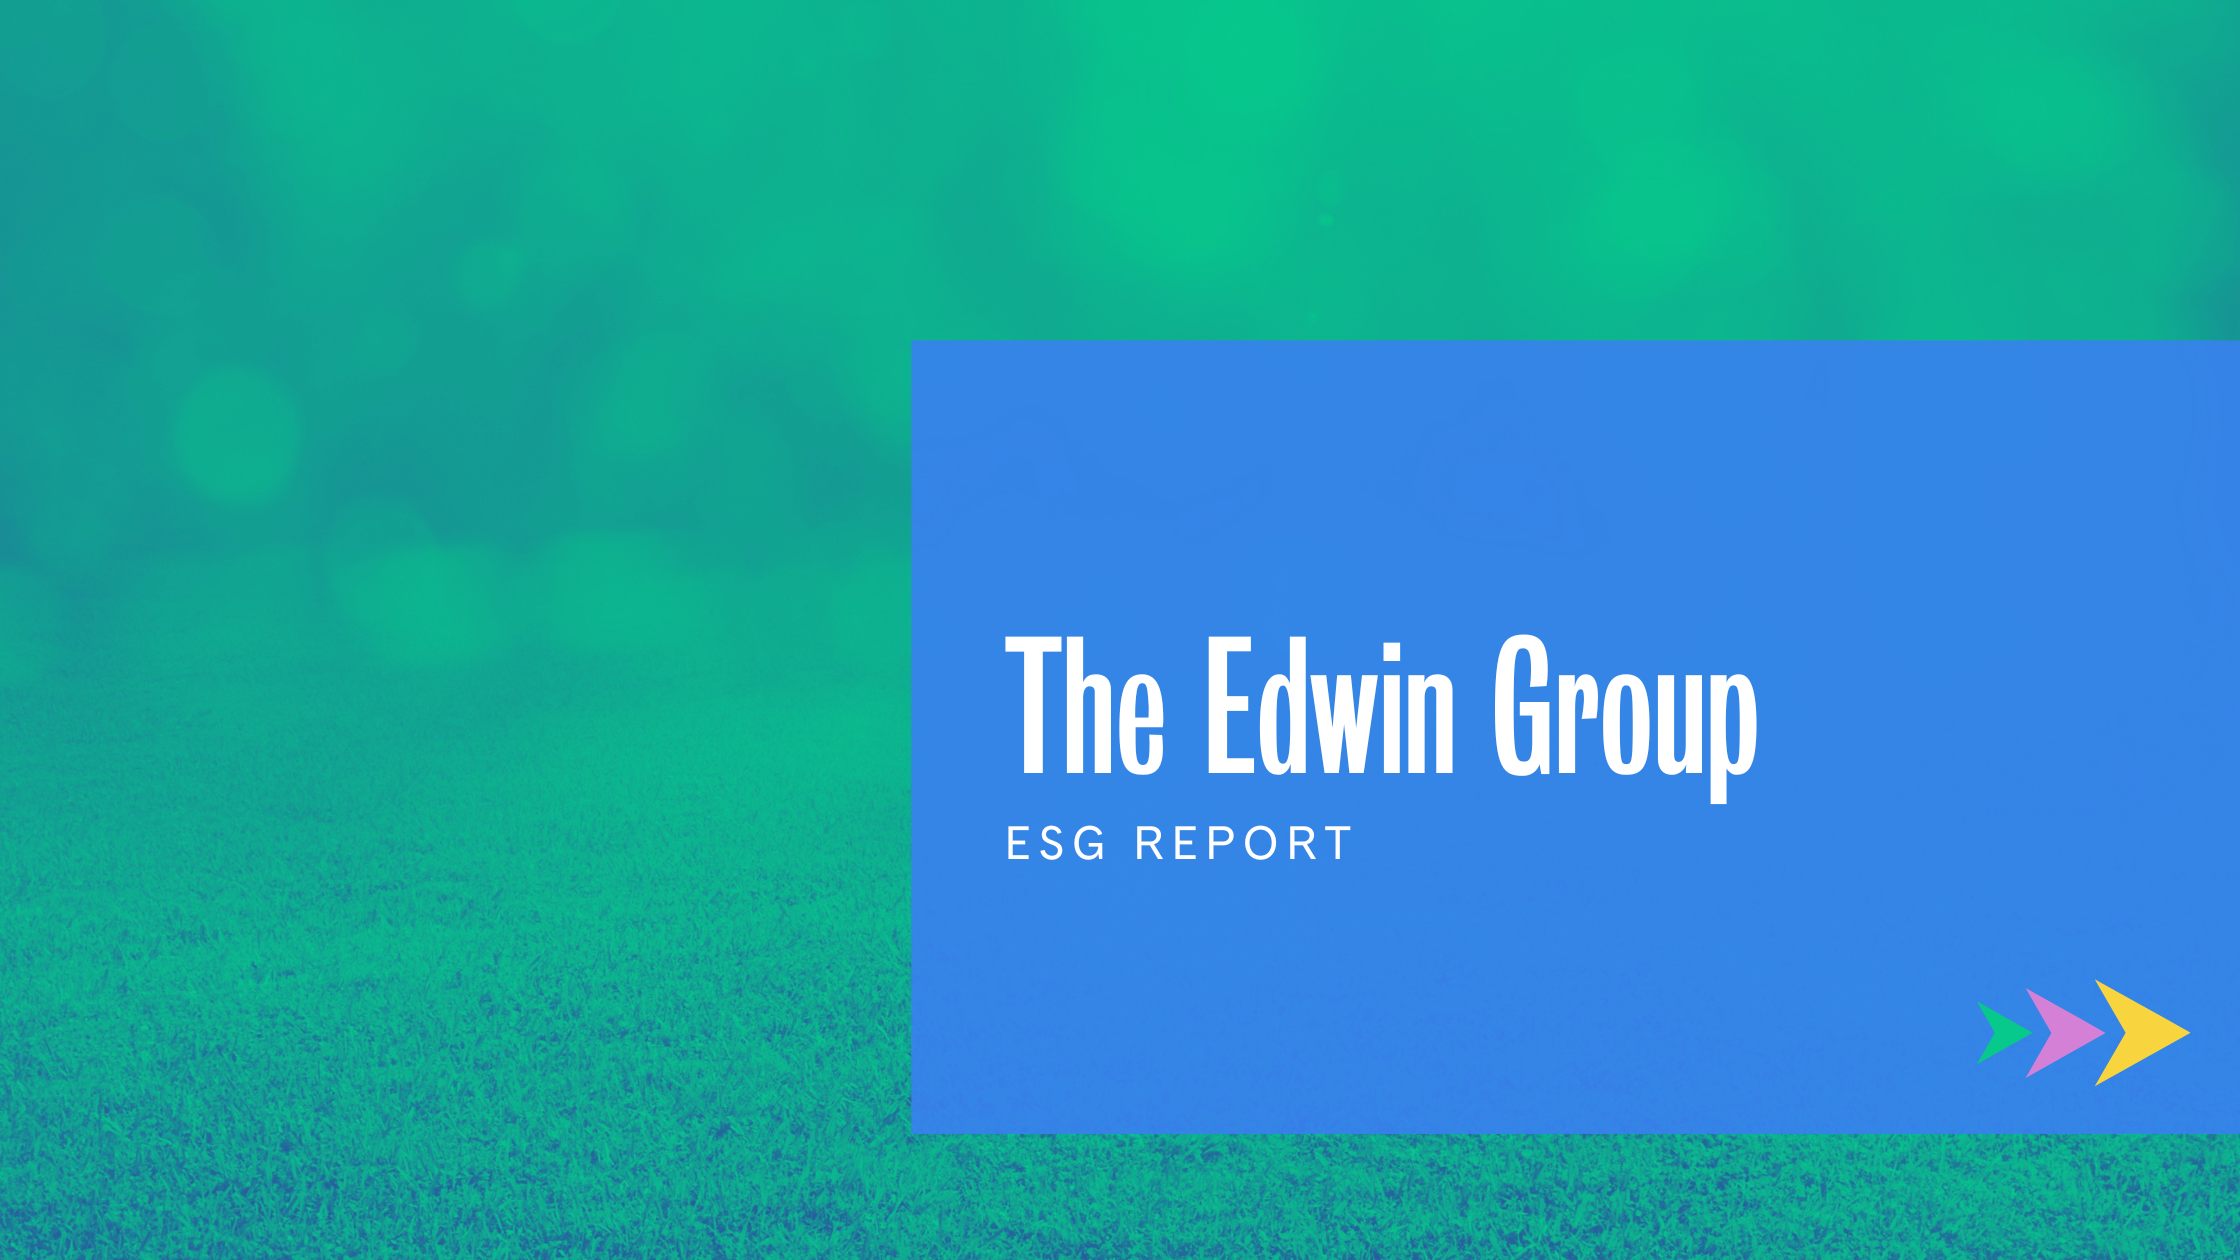 The Edwin Group – ESG Report